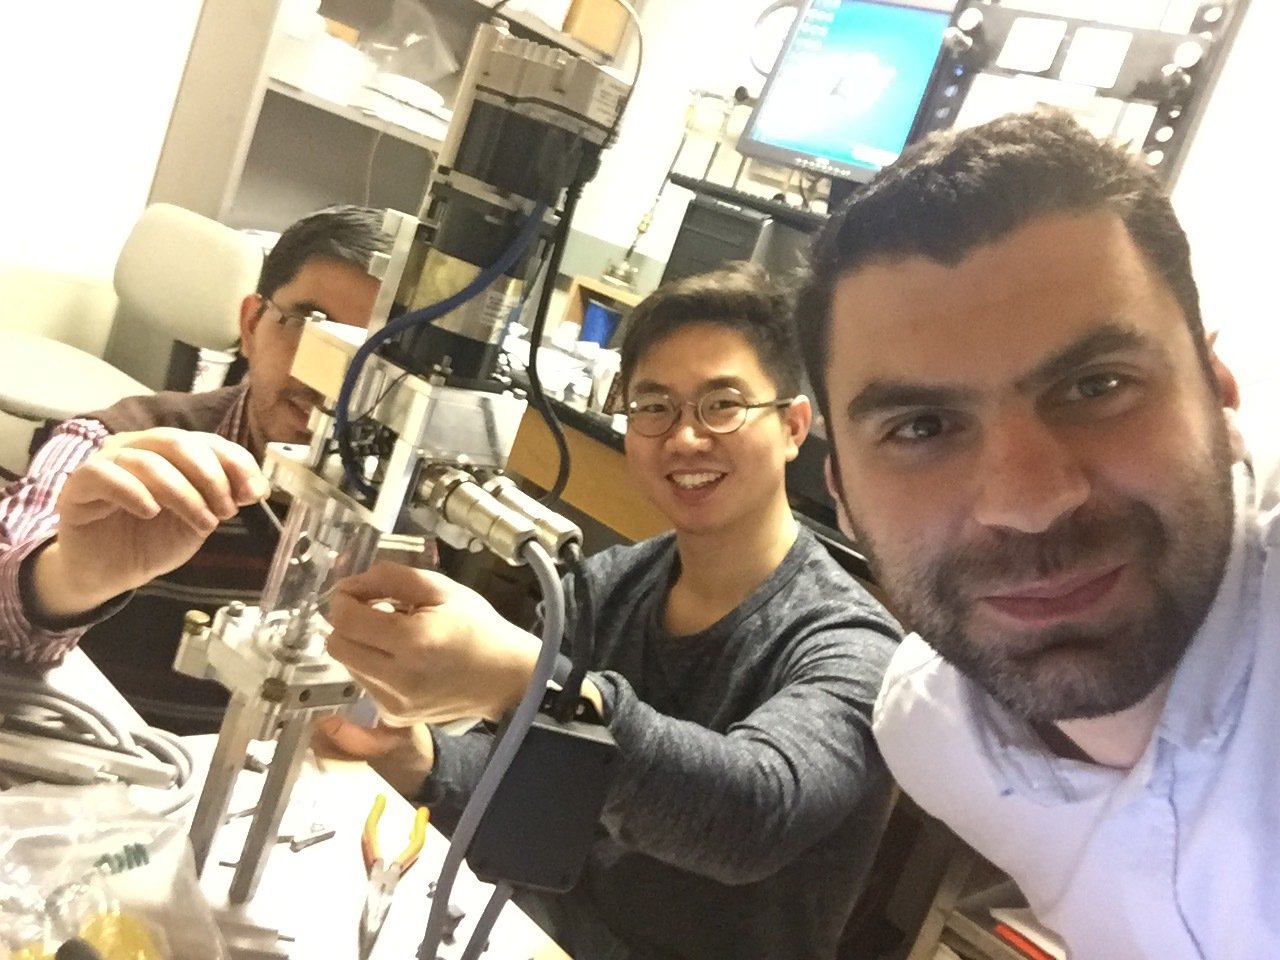 Chang and Mehmet in the lab at Northwestern